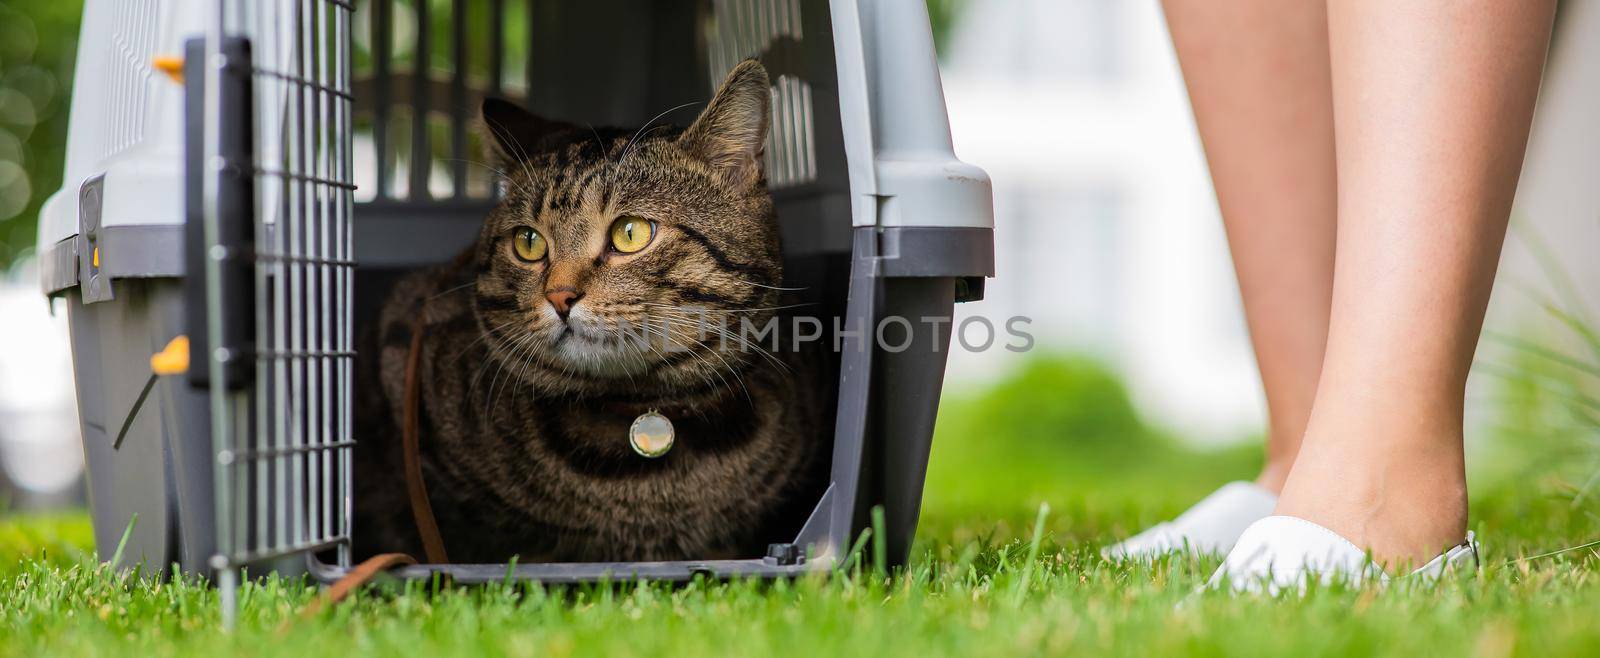 A gray striped cat lies in a carrier on the green grass in the open air next to the feet of the owner